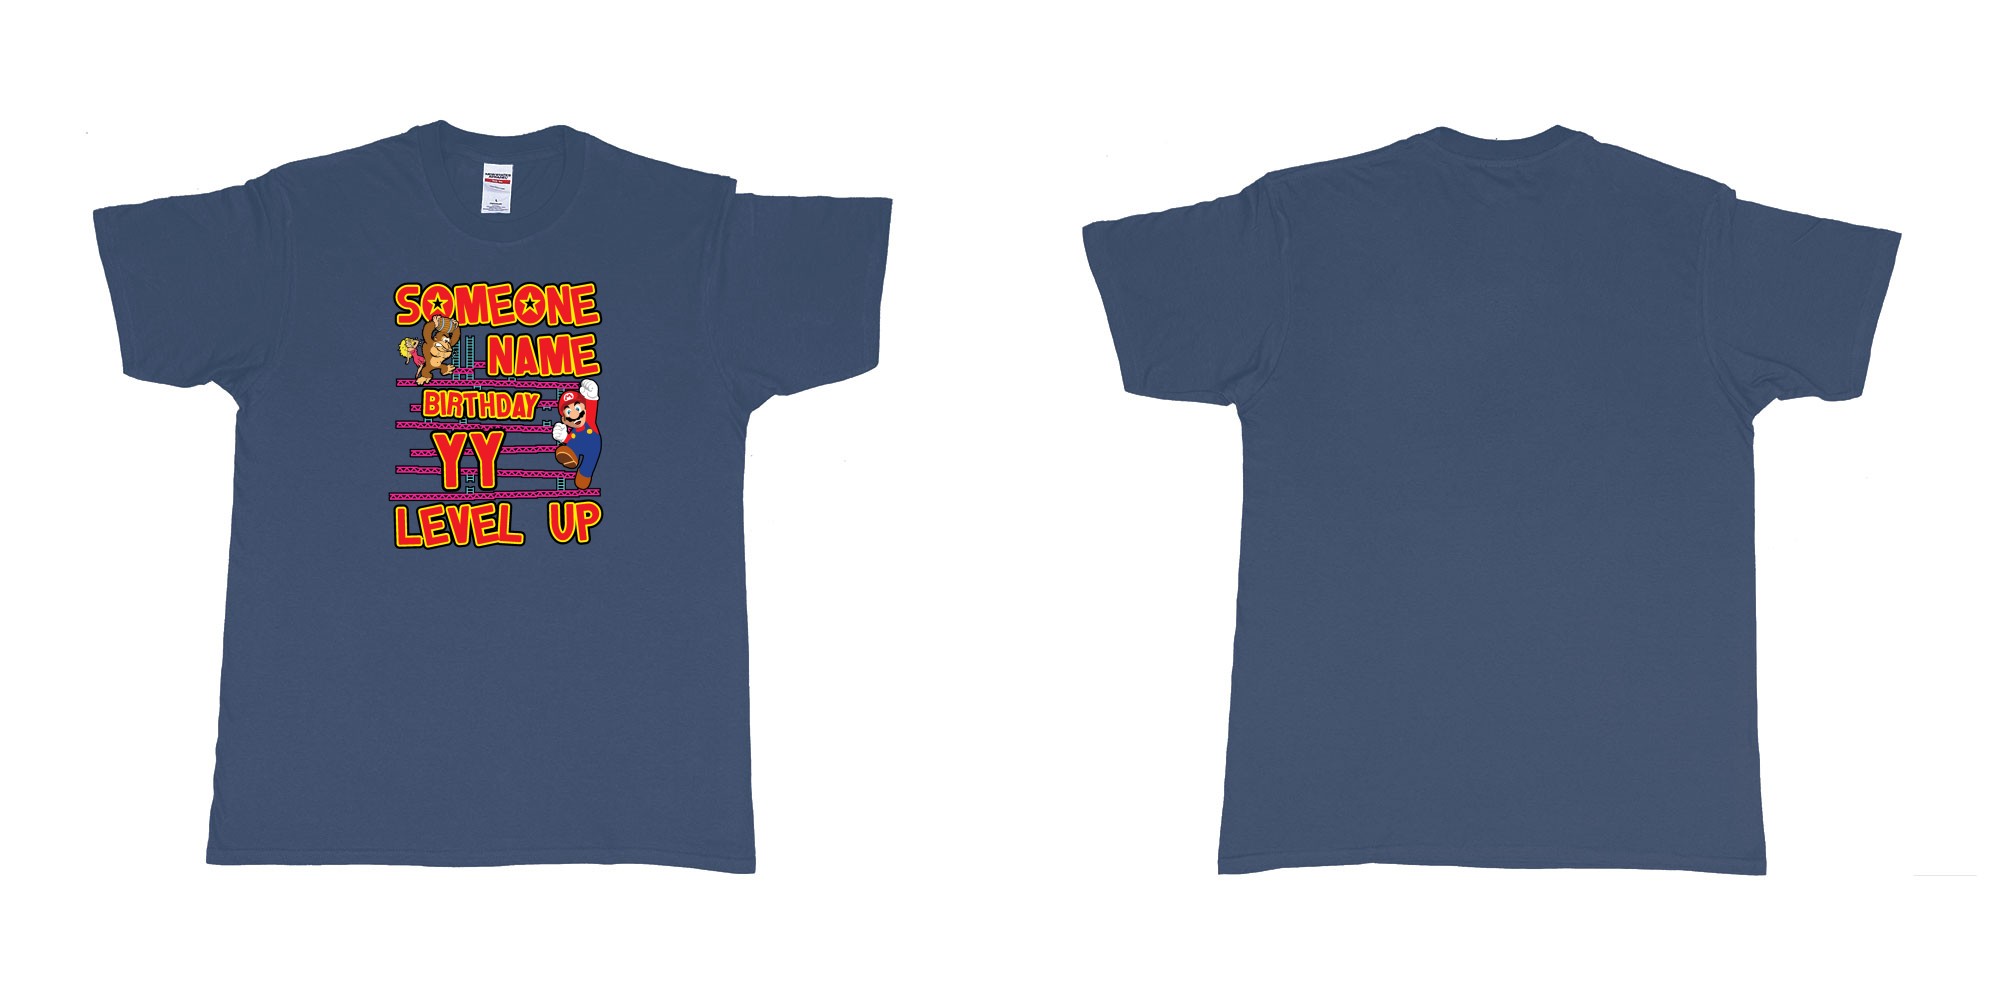 Custom tshirt design donkey kong classic arcade game custom birthday t shirt digital printing bali in fabric color navy choice your own text made in Bali by The Pirate Way